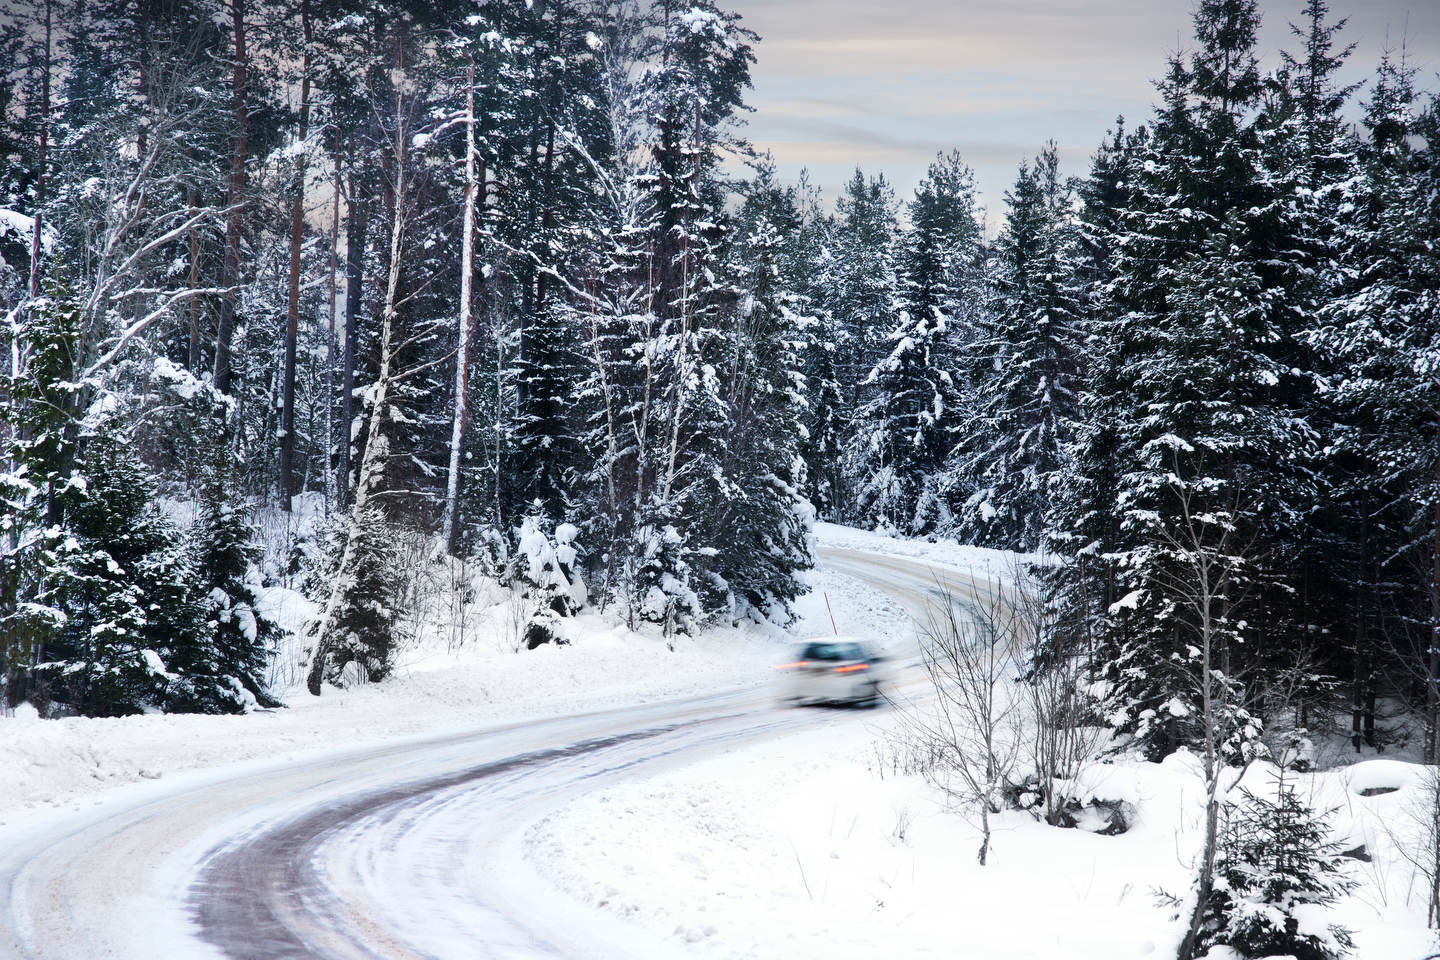 Chevrolet faces the cold: 3 essential winter accessories for your vehicle